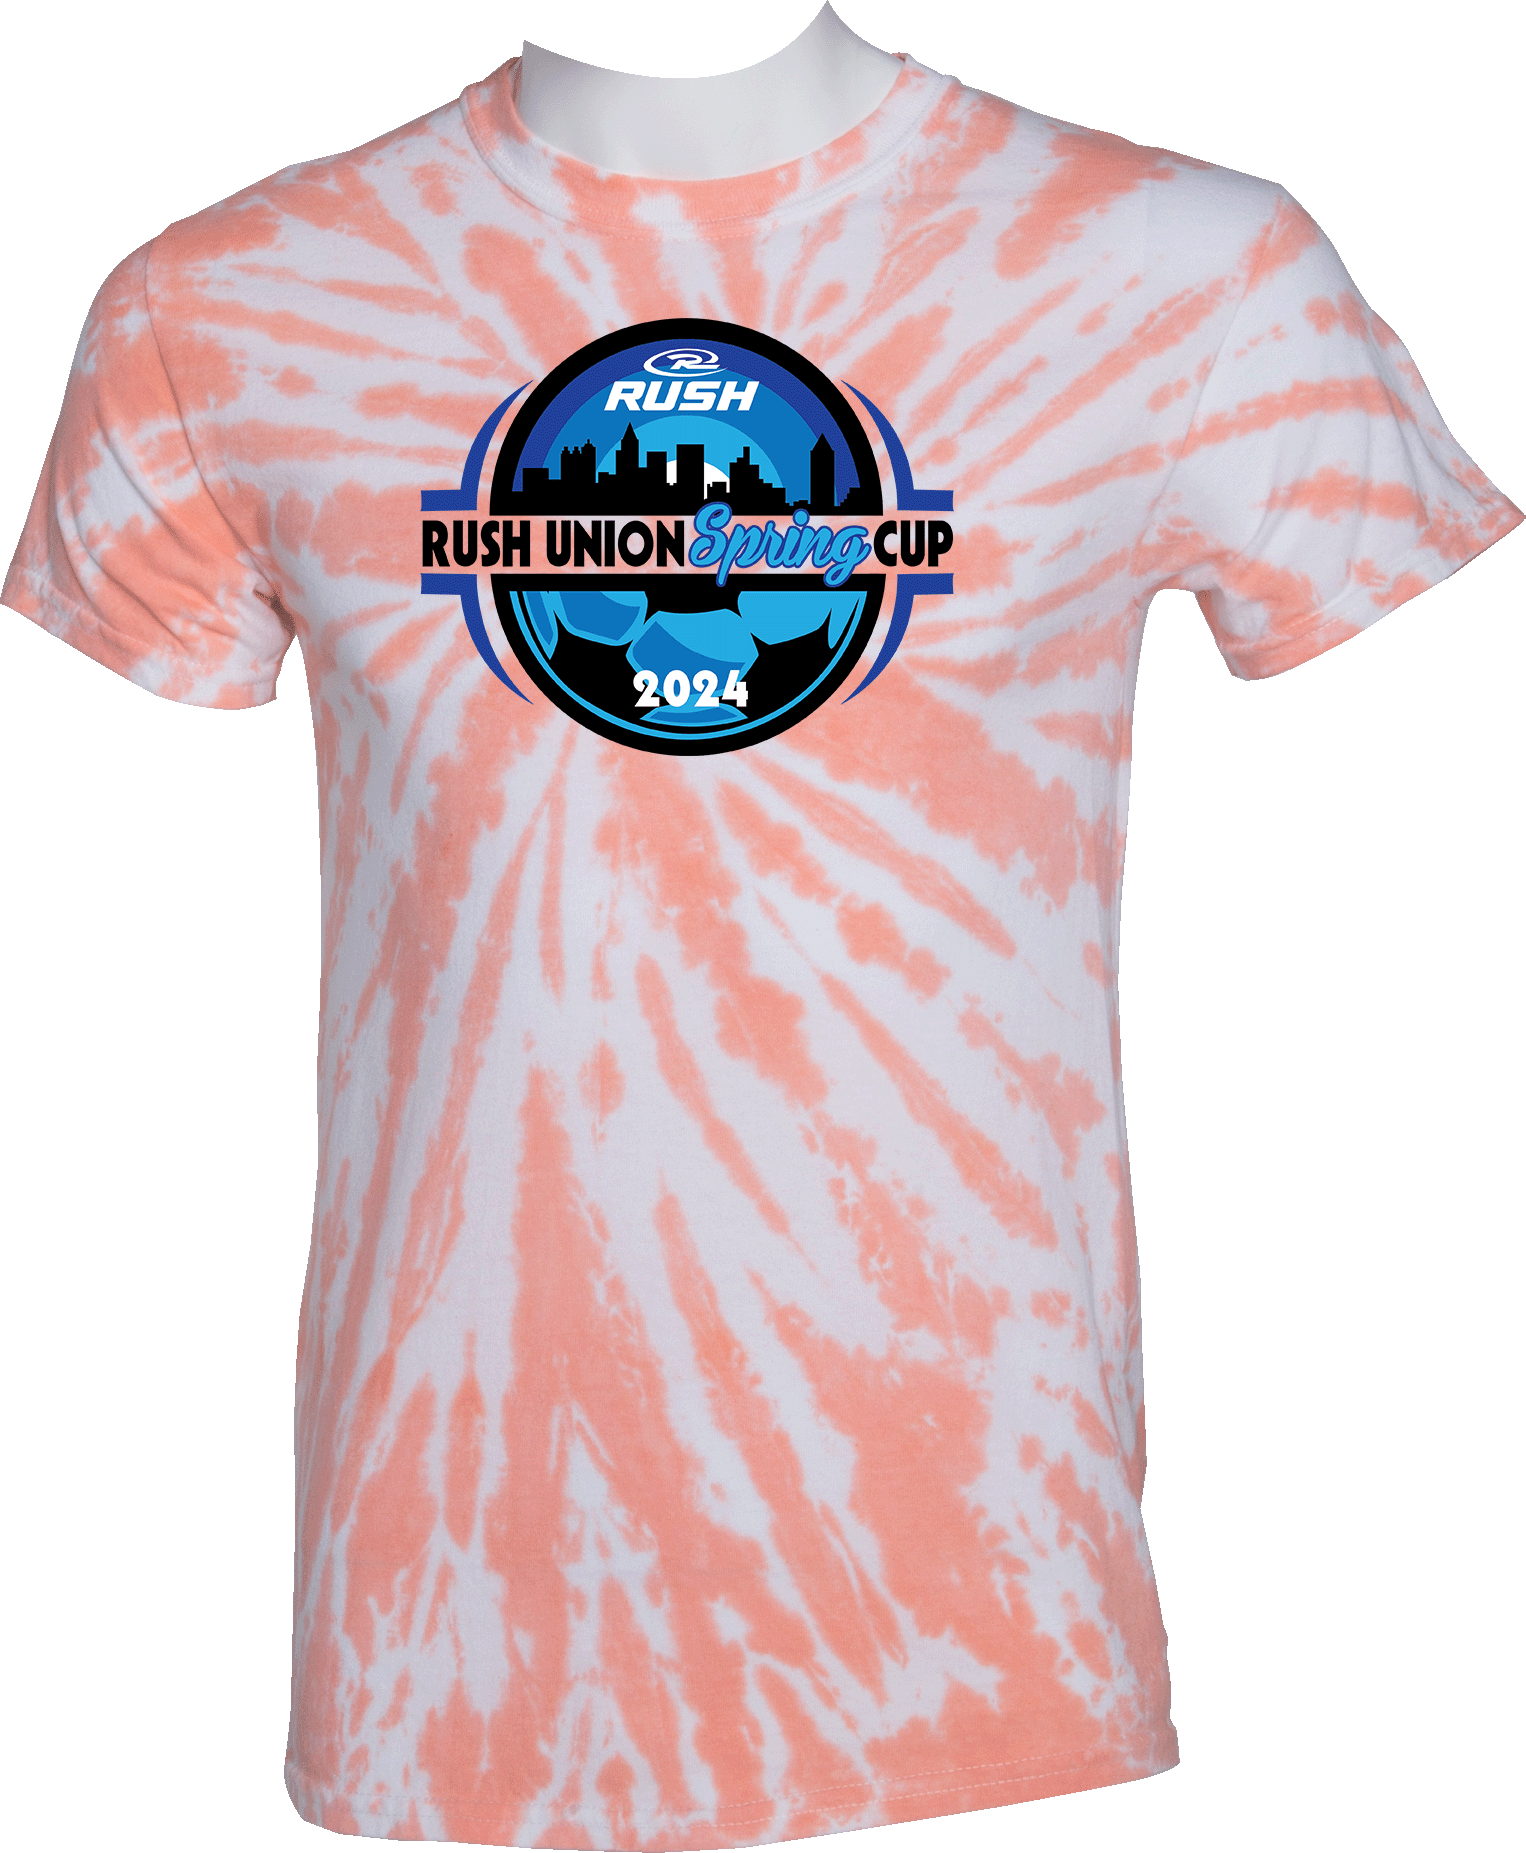 Tie-Dye Short Sleeves - 2024 Rush Union Spring Cup